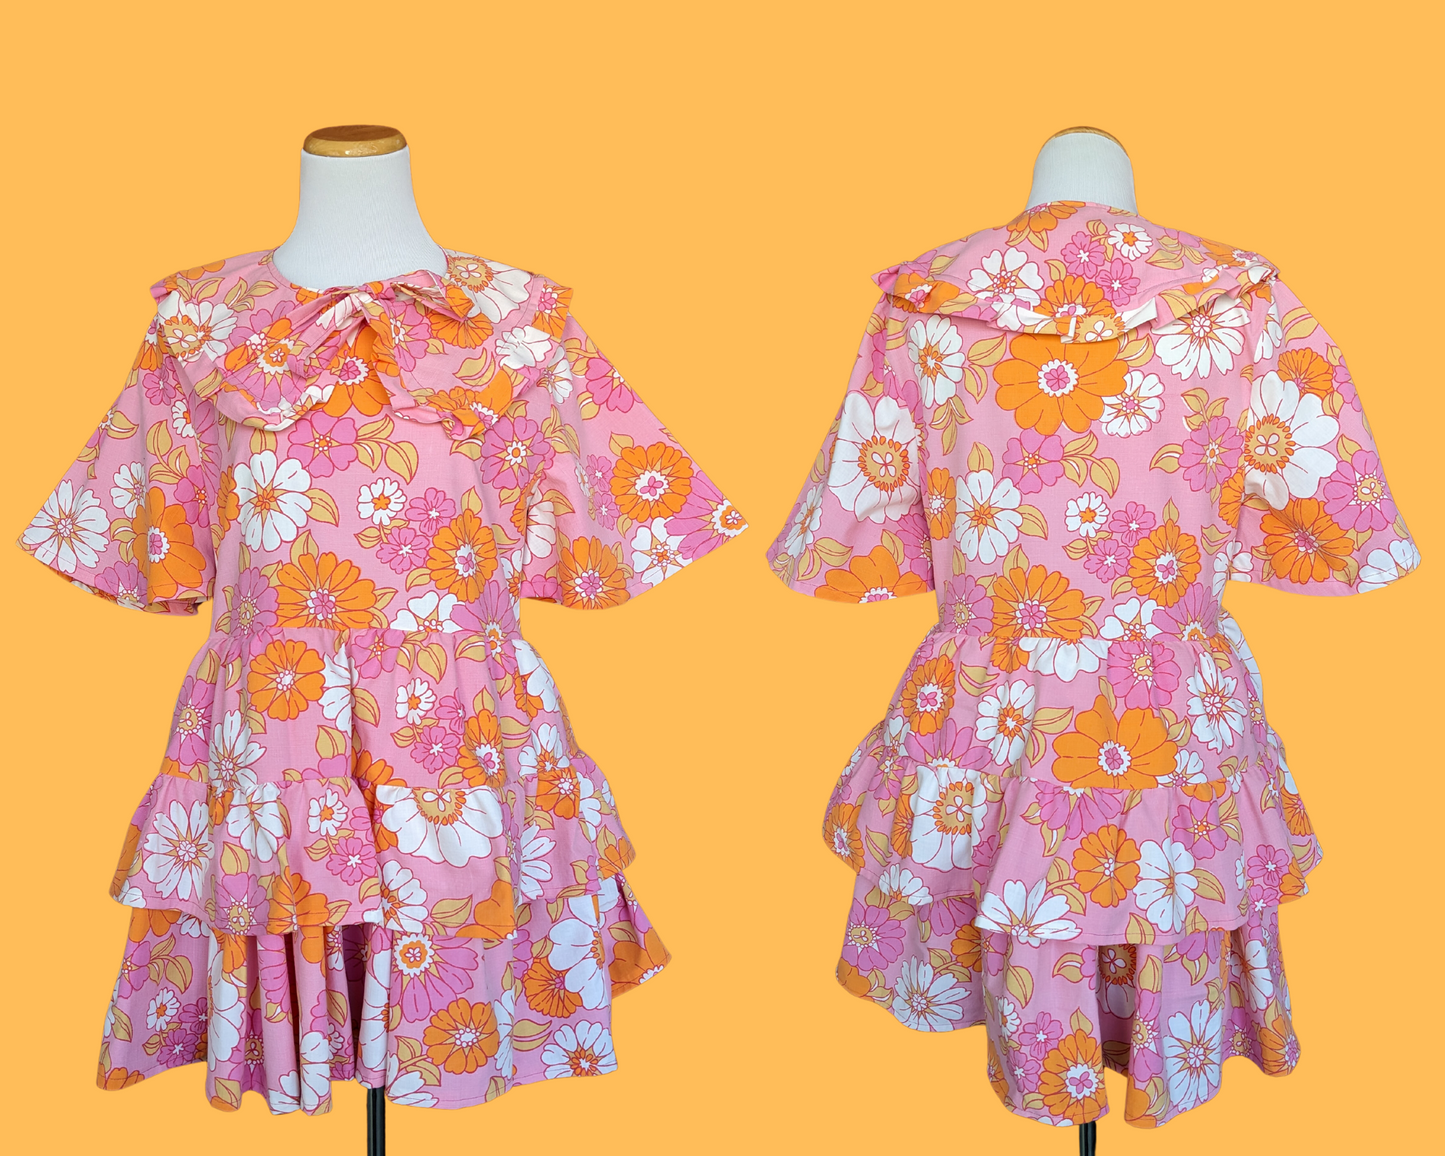 Handmade, Upcycled Vintage 1960's Pink and Orange Floral Bedsheet Dress with Matching Detachable Collar Size S